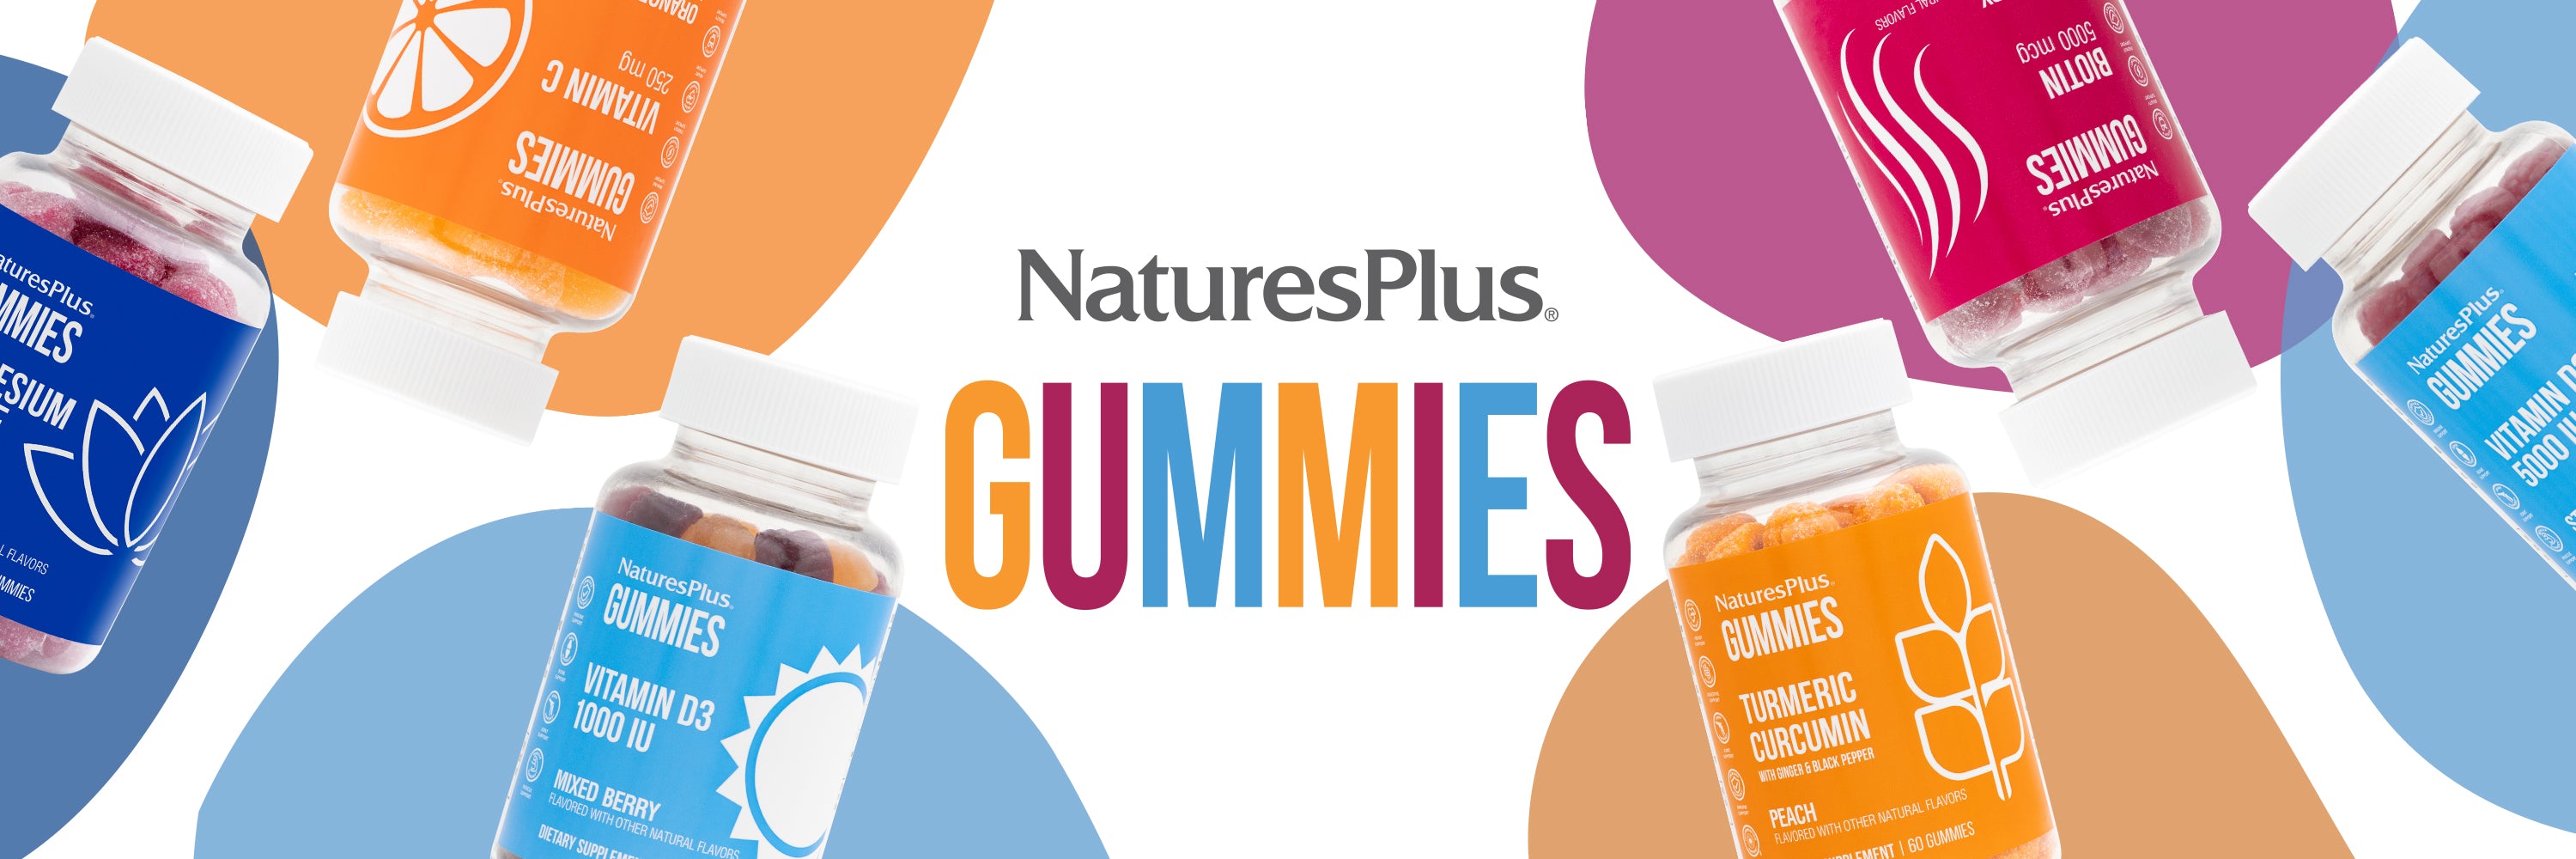 Gummies collection image banner